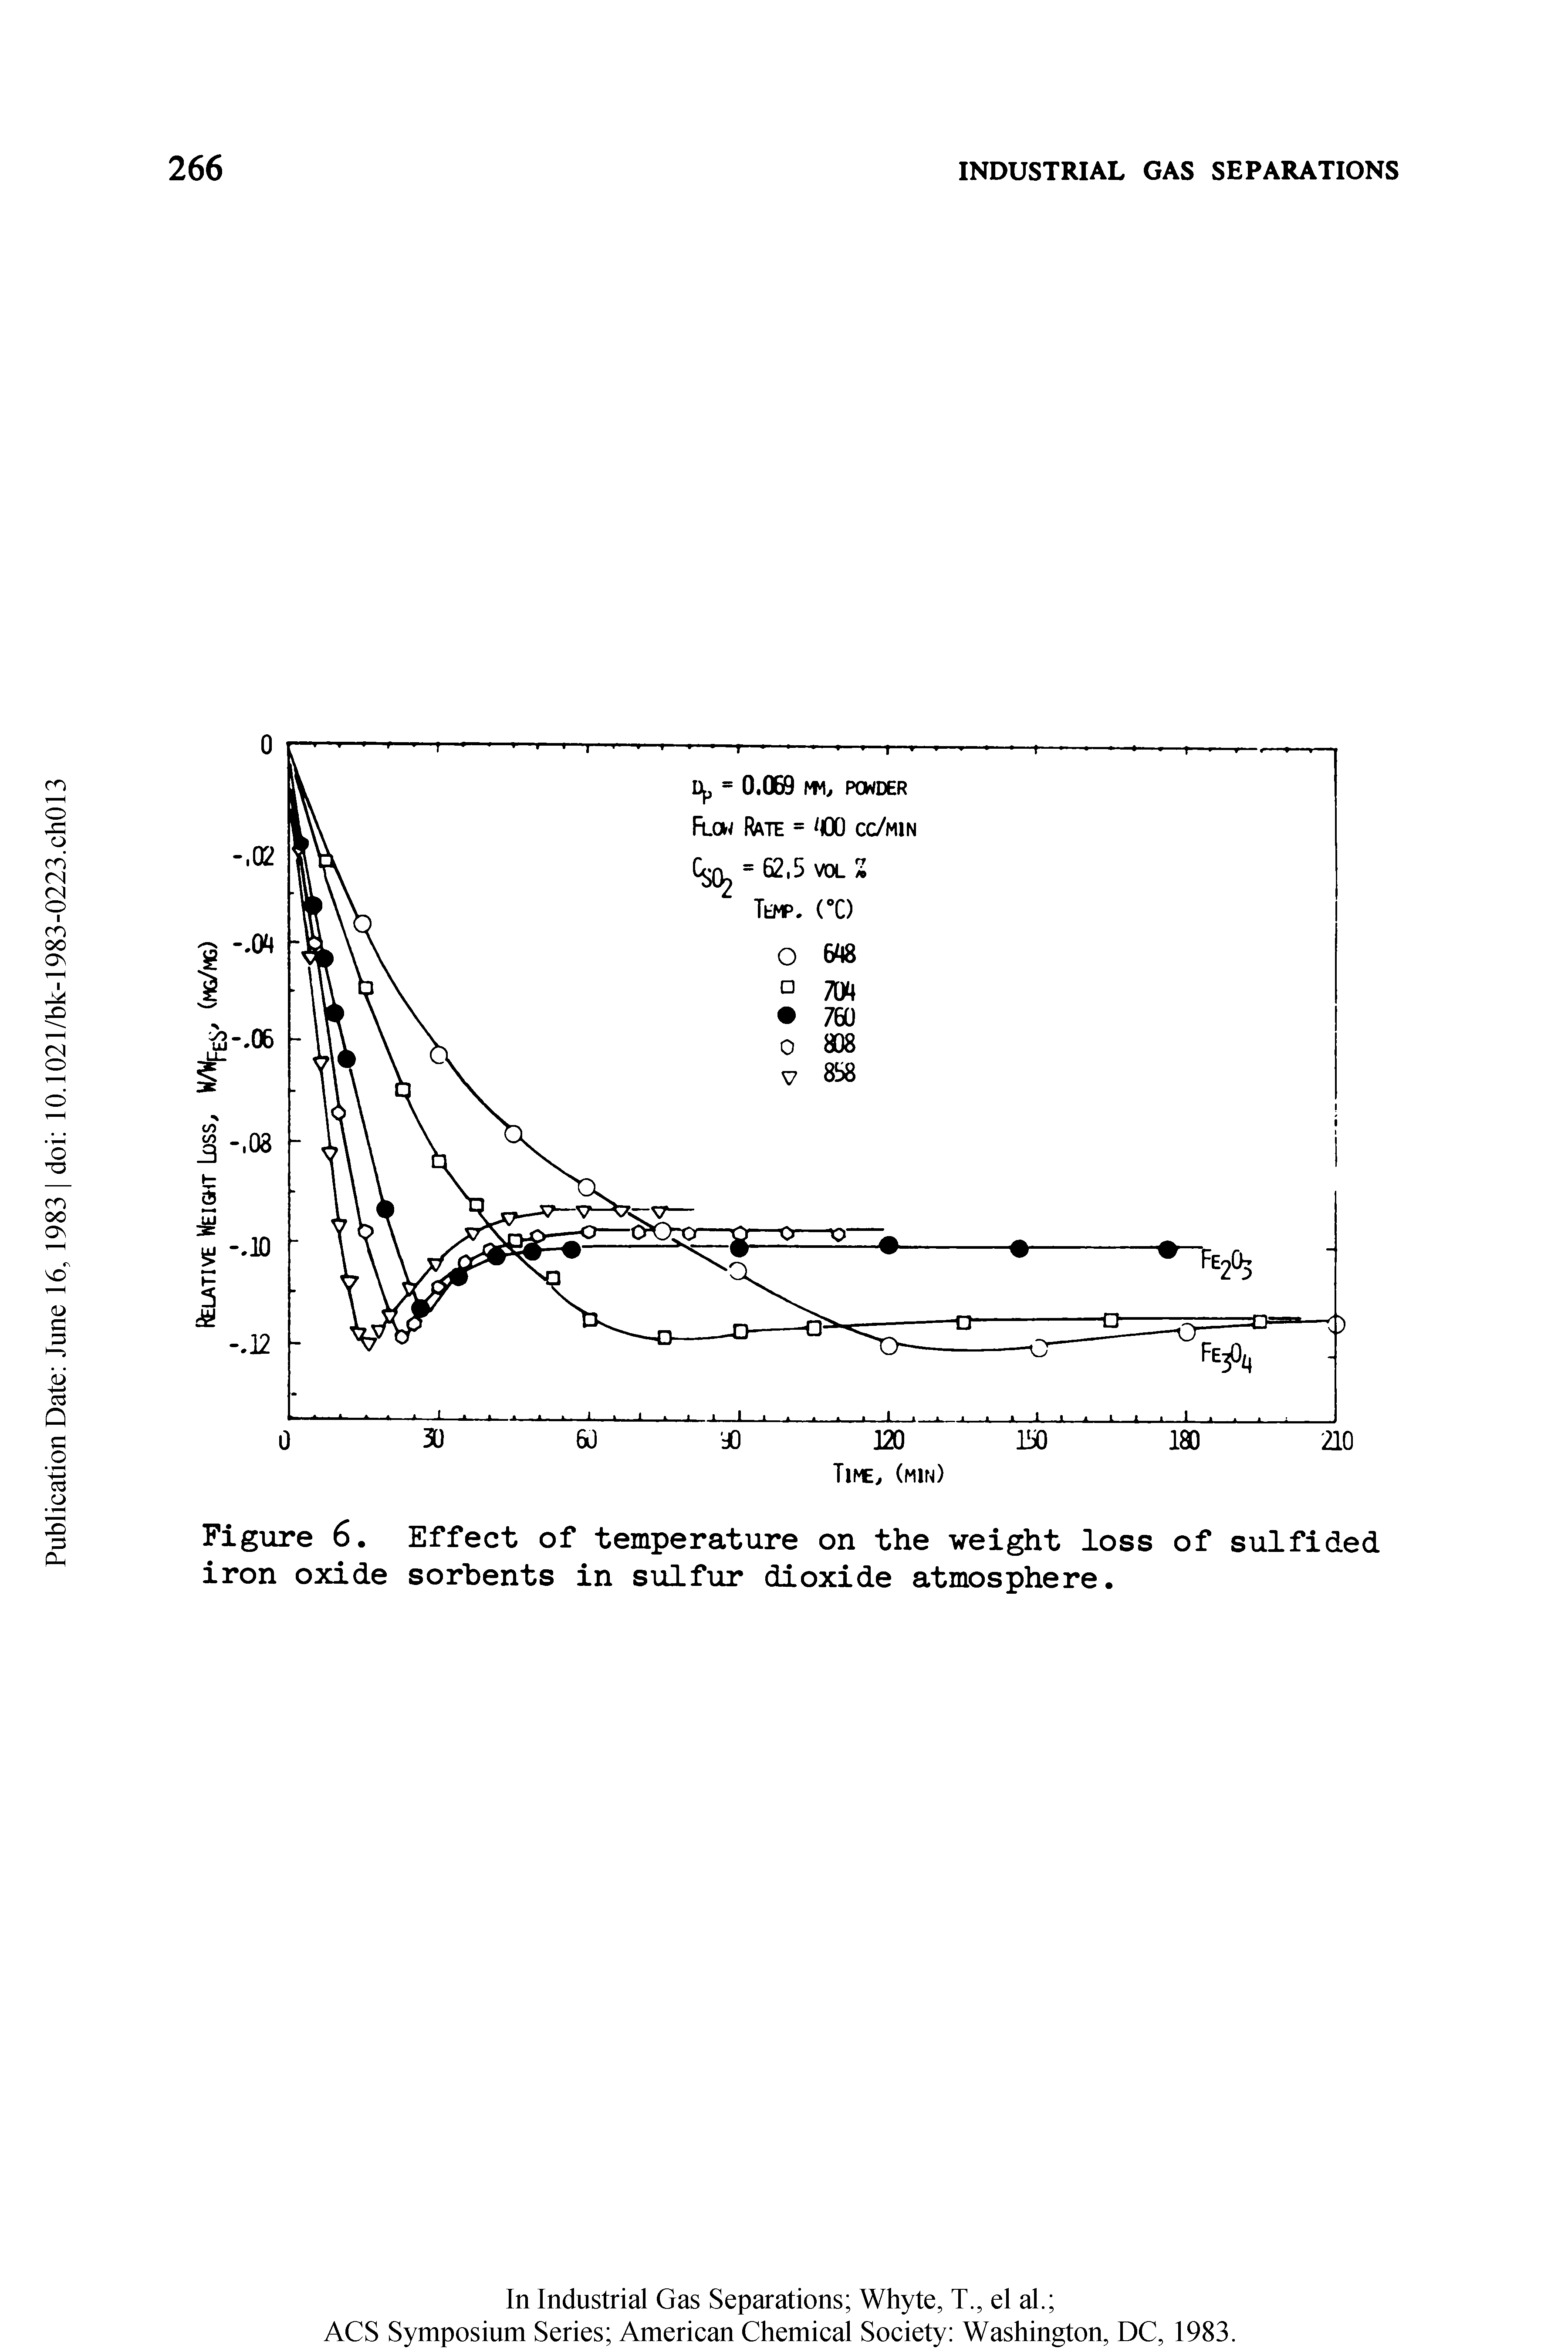 Figure 6. Effect of temperature on the weight loss of sulfided iron oxide sorbents in sulfur dioxide atmosphere.